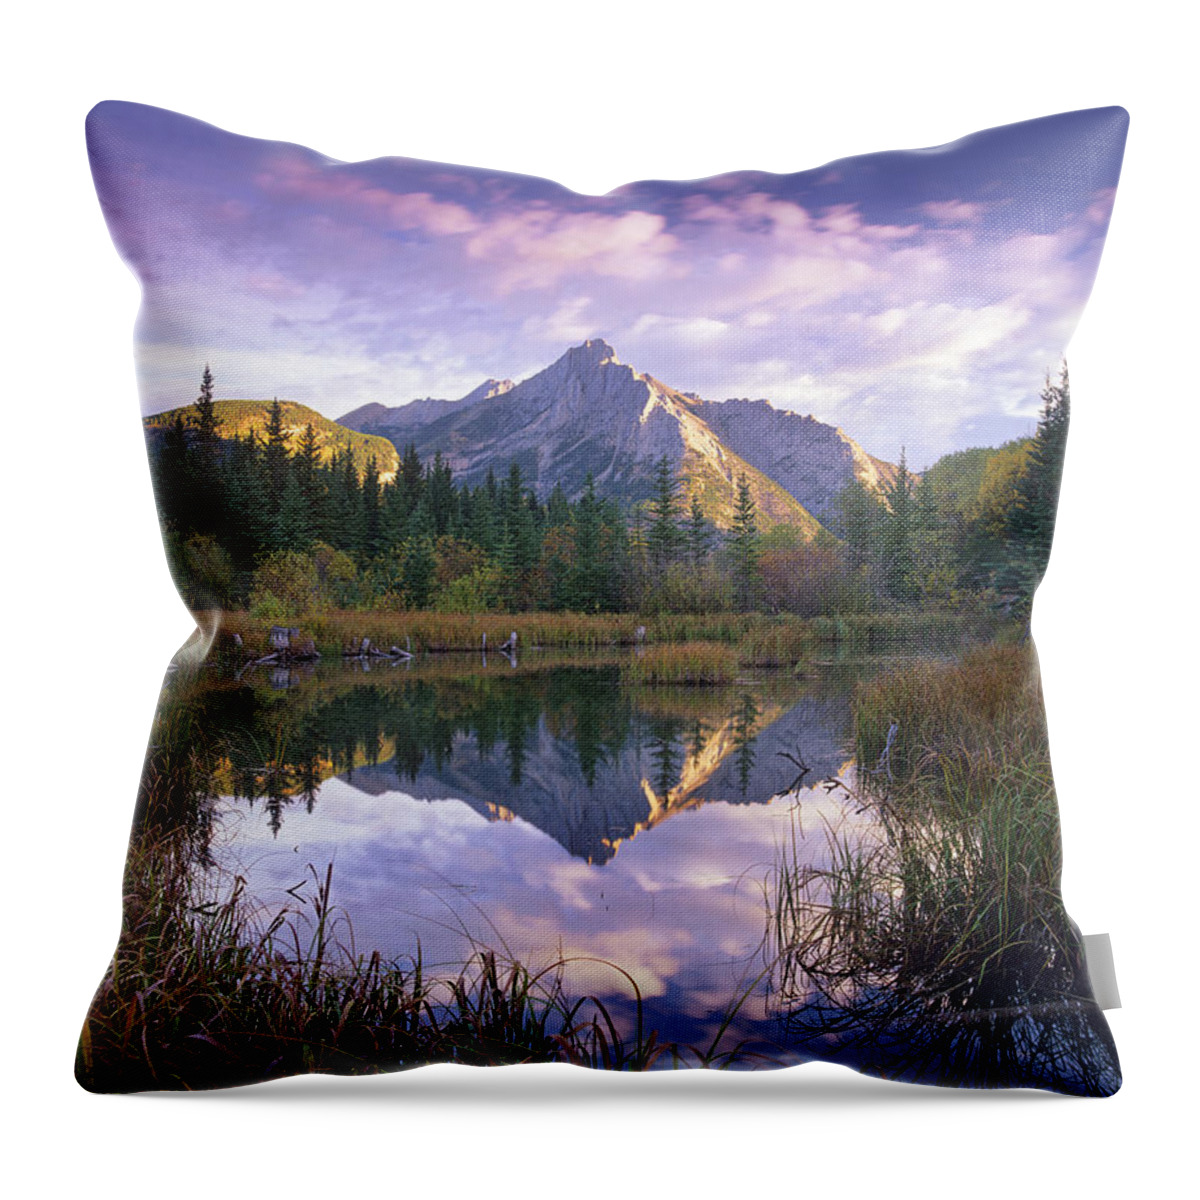 00175868 Throw Pillow featuring the photograph Mount Lorette And Spruce Trees by Tim Fitzharris